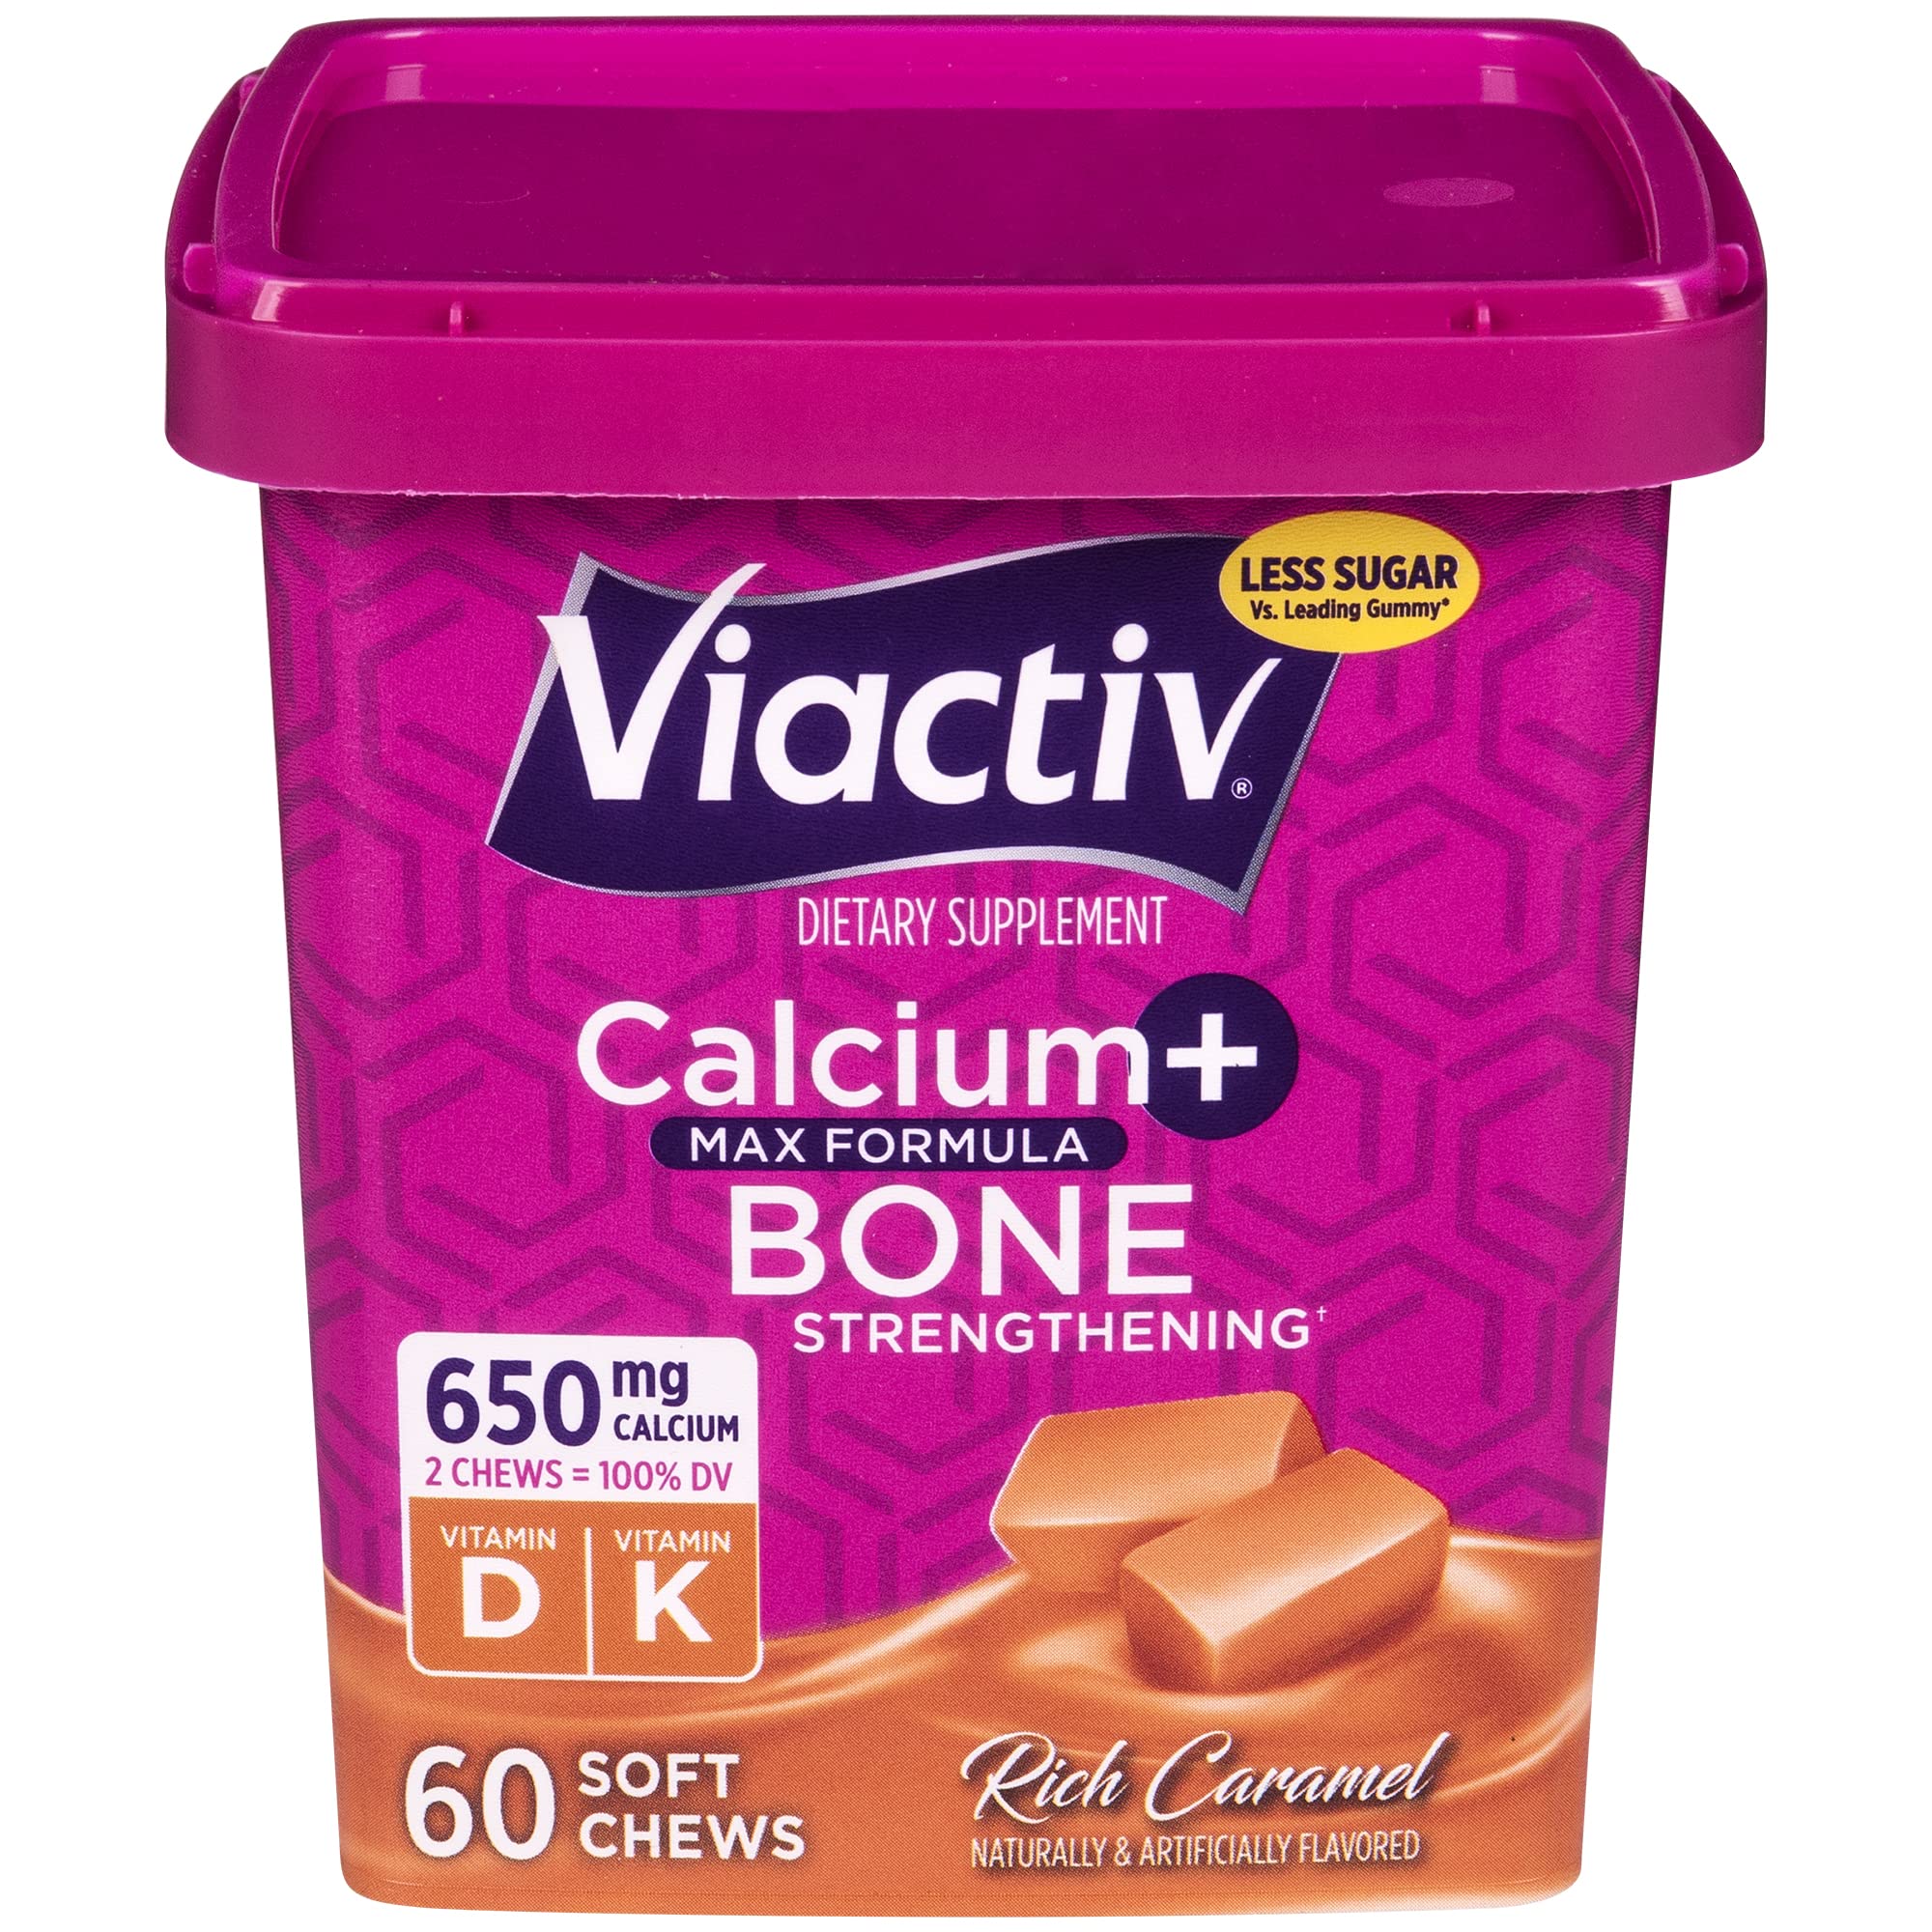 Viactiv Calcium +Vitamin D3 Supplement Soft Chews, Caramel & Caltrate Soft Chews 600 Plus D3 Calcium Vitamin D Supplement, Chocolate Truffle - 60 Count(Packaging May Vary)